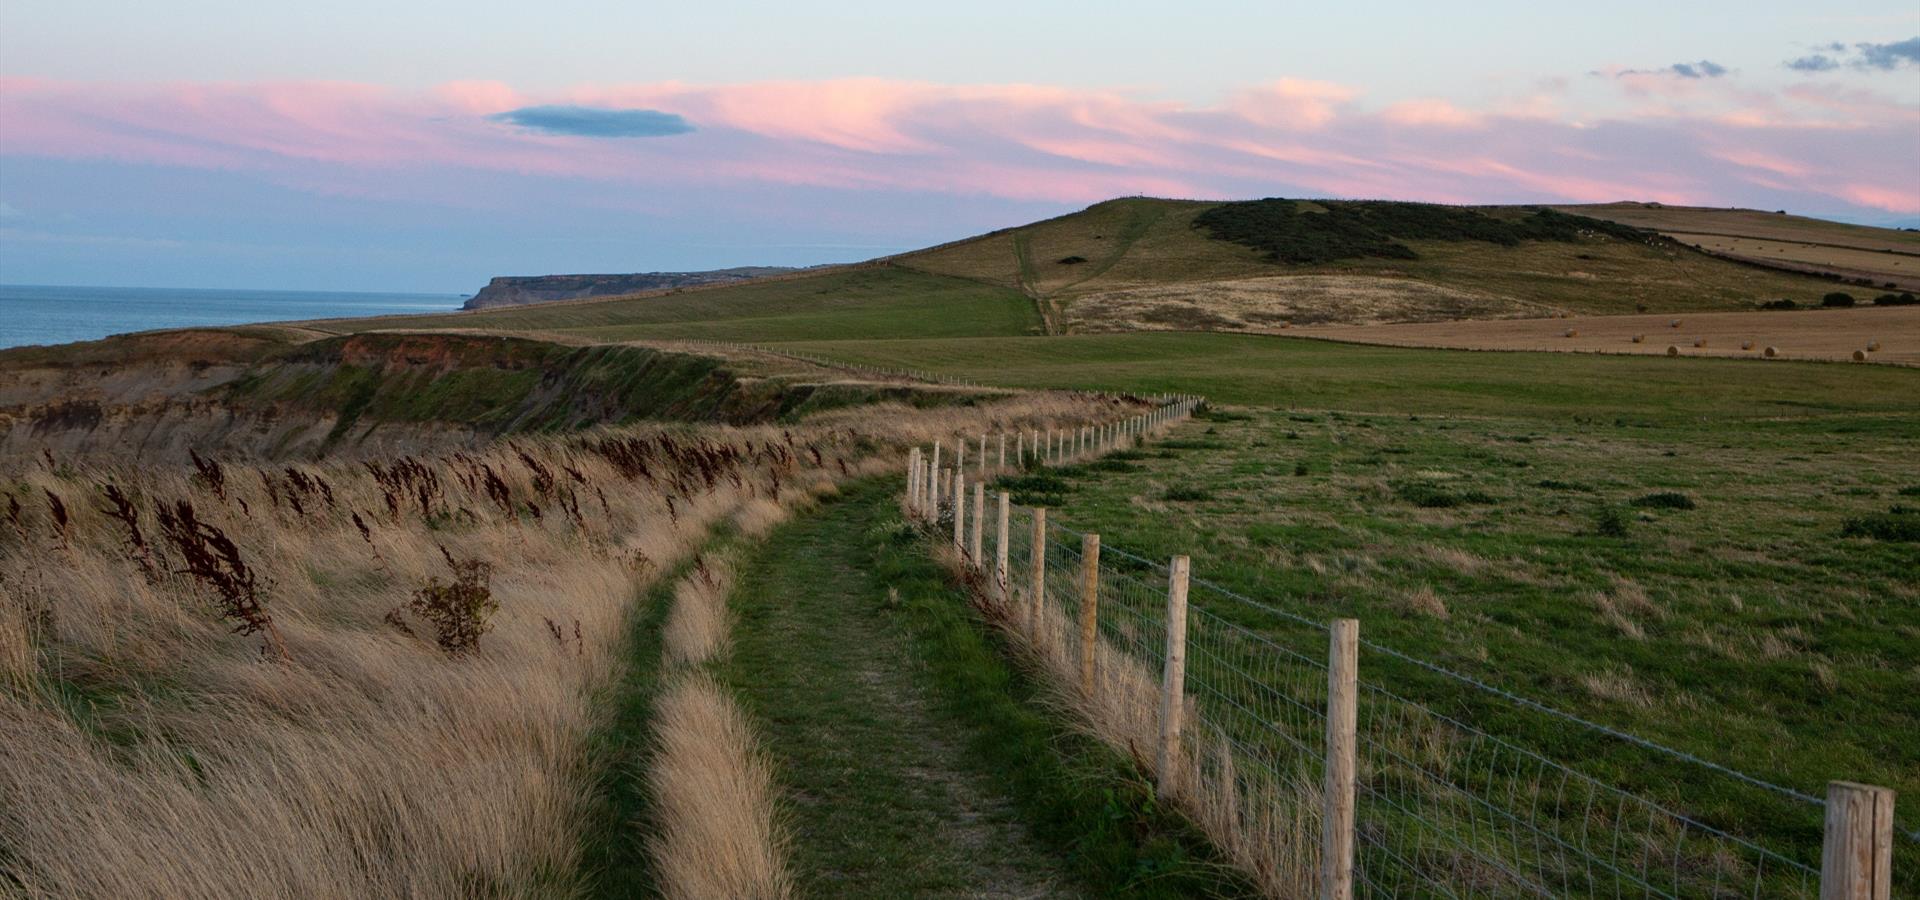 An image of the Cleveland Way by Duncan Lomax